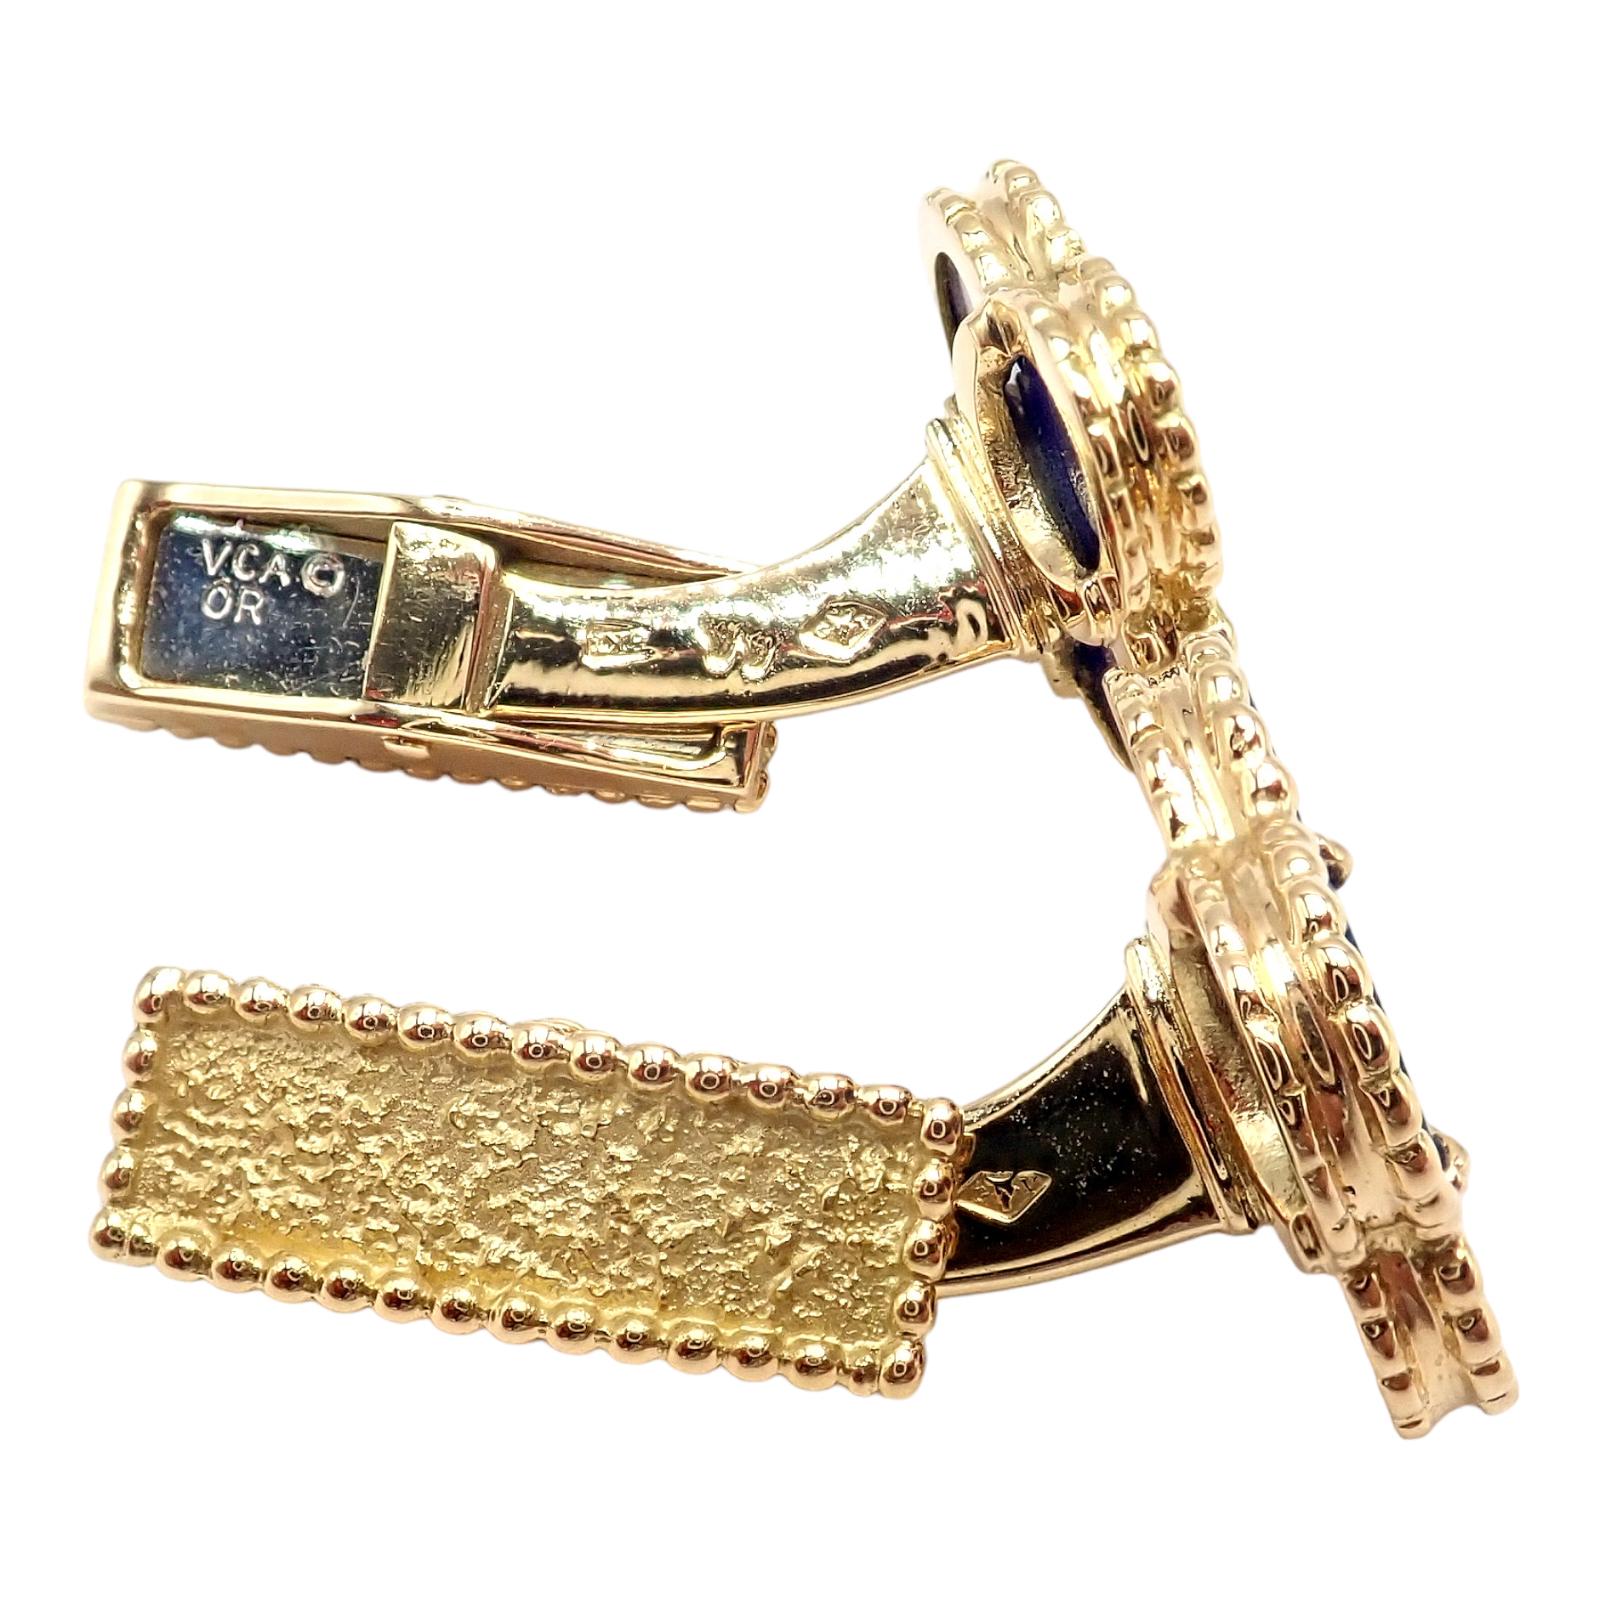 Van Cleef & Arpels Lapis Lazuli Vintage Alhambra Yellow Gold Cufflinks In Excellent Condition For Sale In Holland, PA